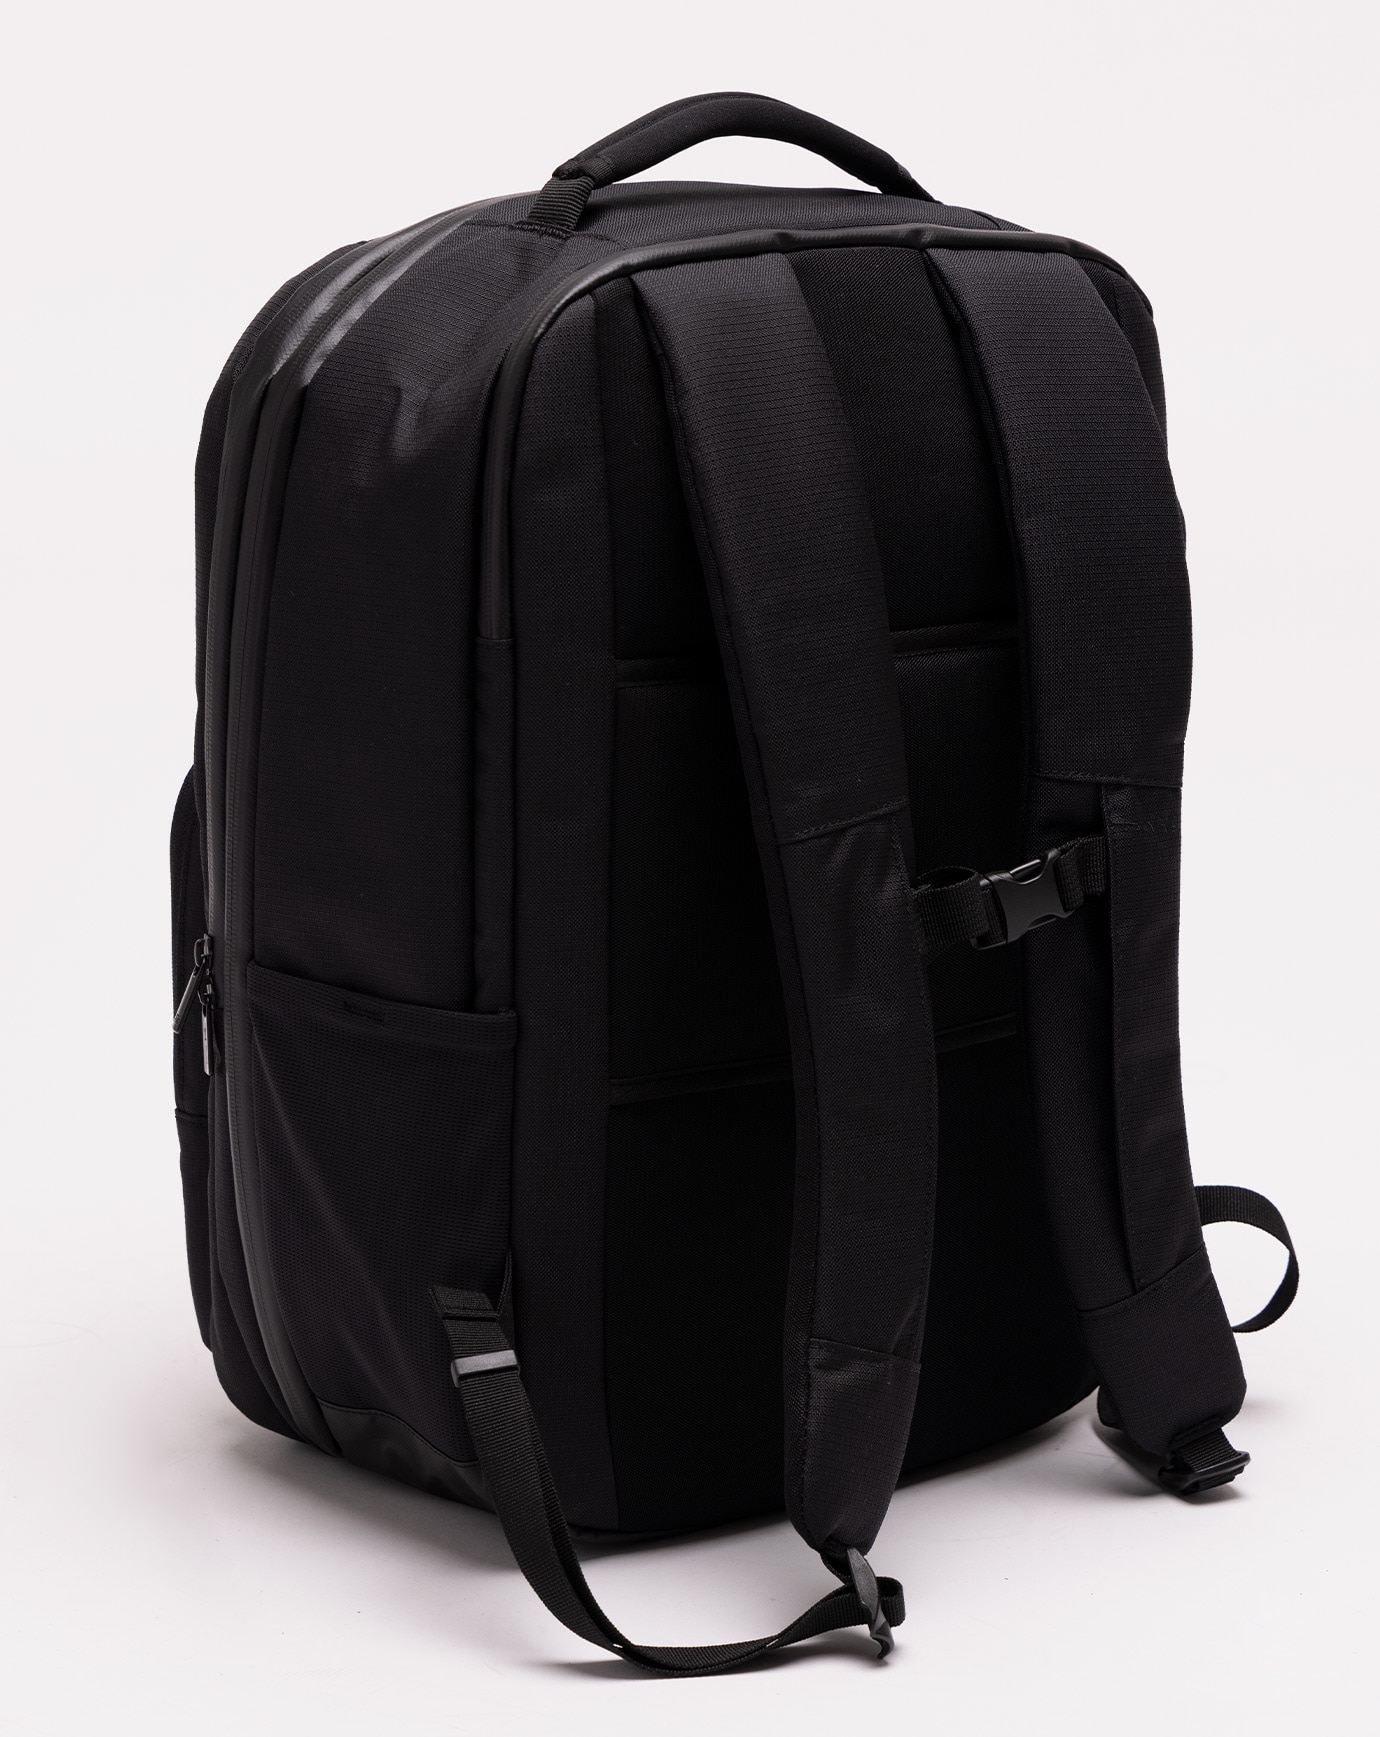 1ST CLASS BACKPACK Image Thumbnail 3